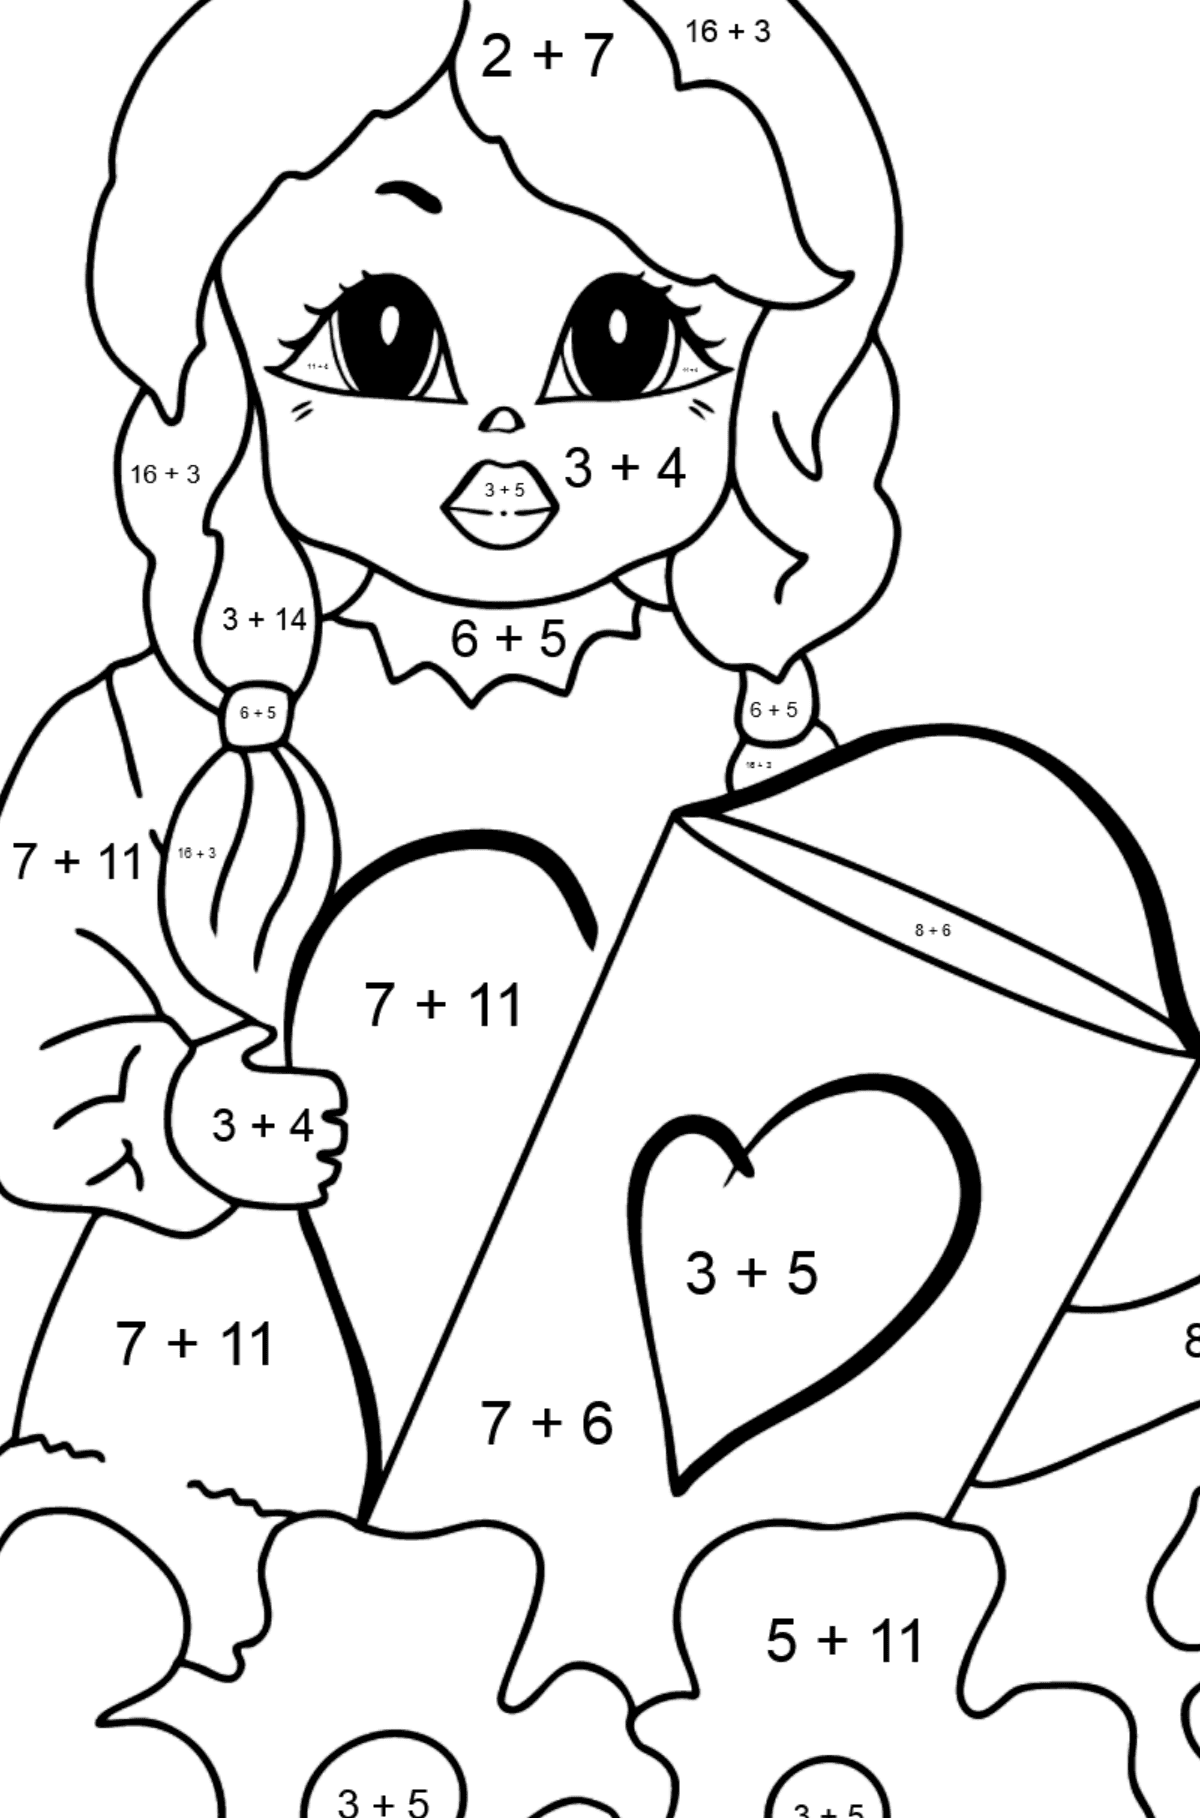 Coloring Page - A Princess with a Watering Can - Math Coloring - Addition for Kids